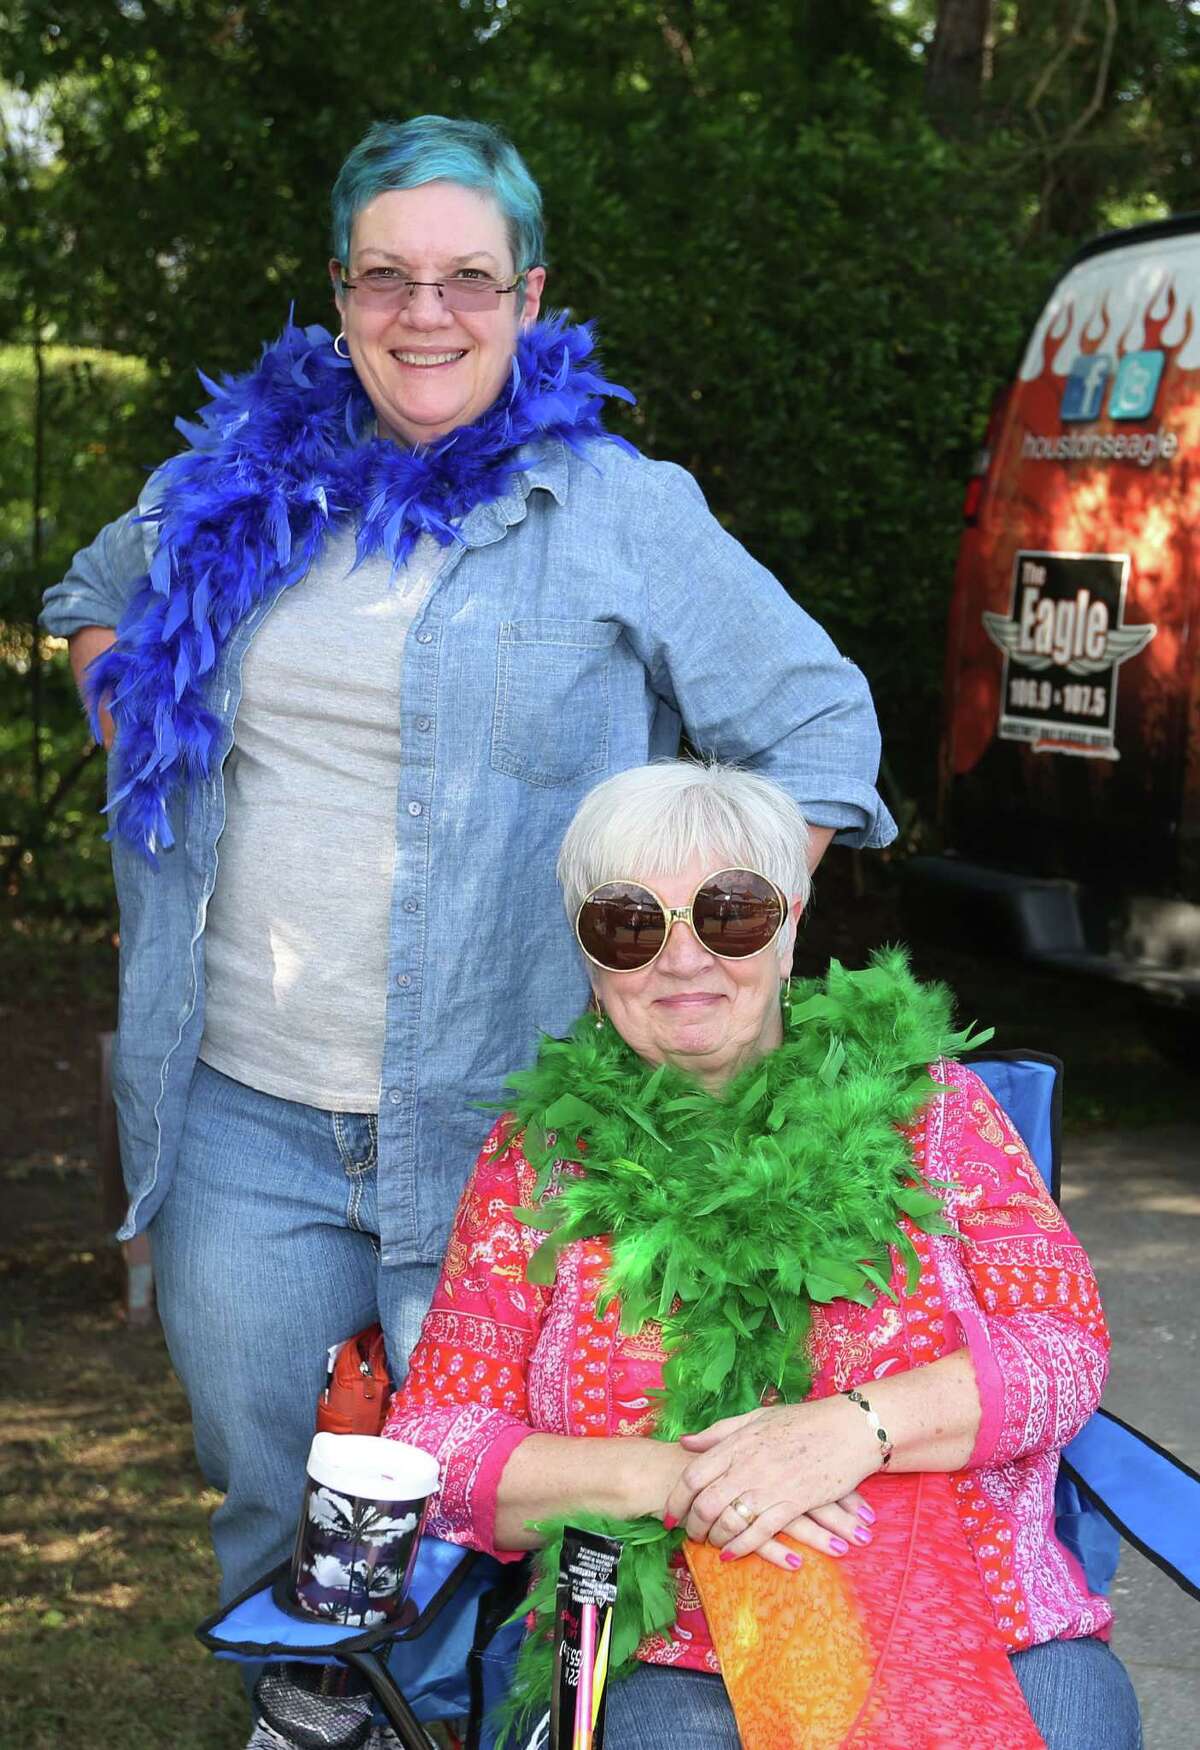 Elton John fans at his concert on May 1 at the Cynthia Woods Mitchell Pavilion